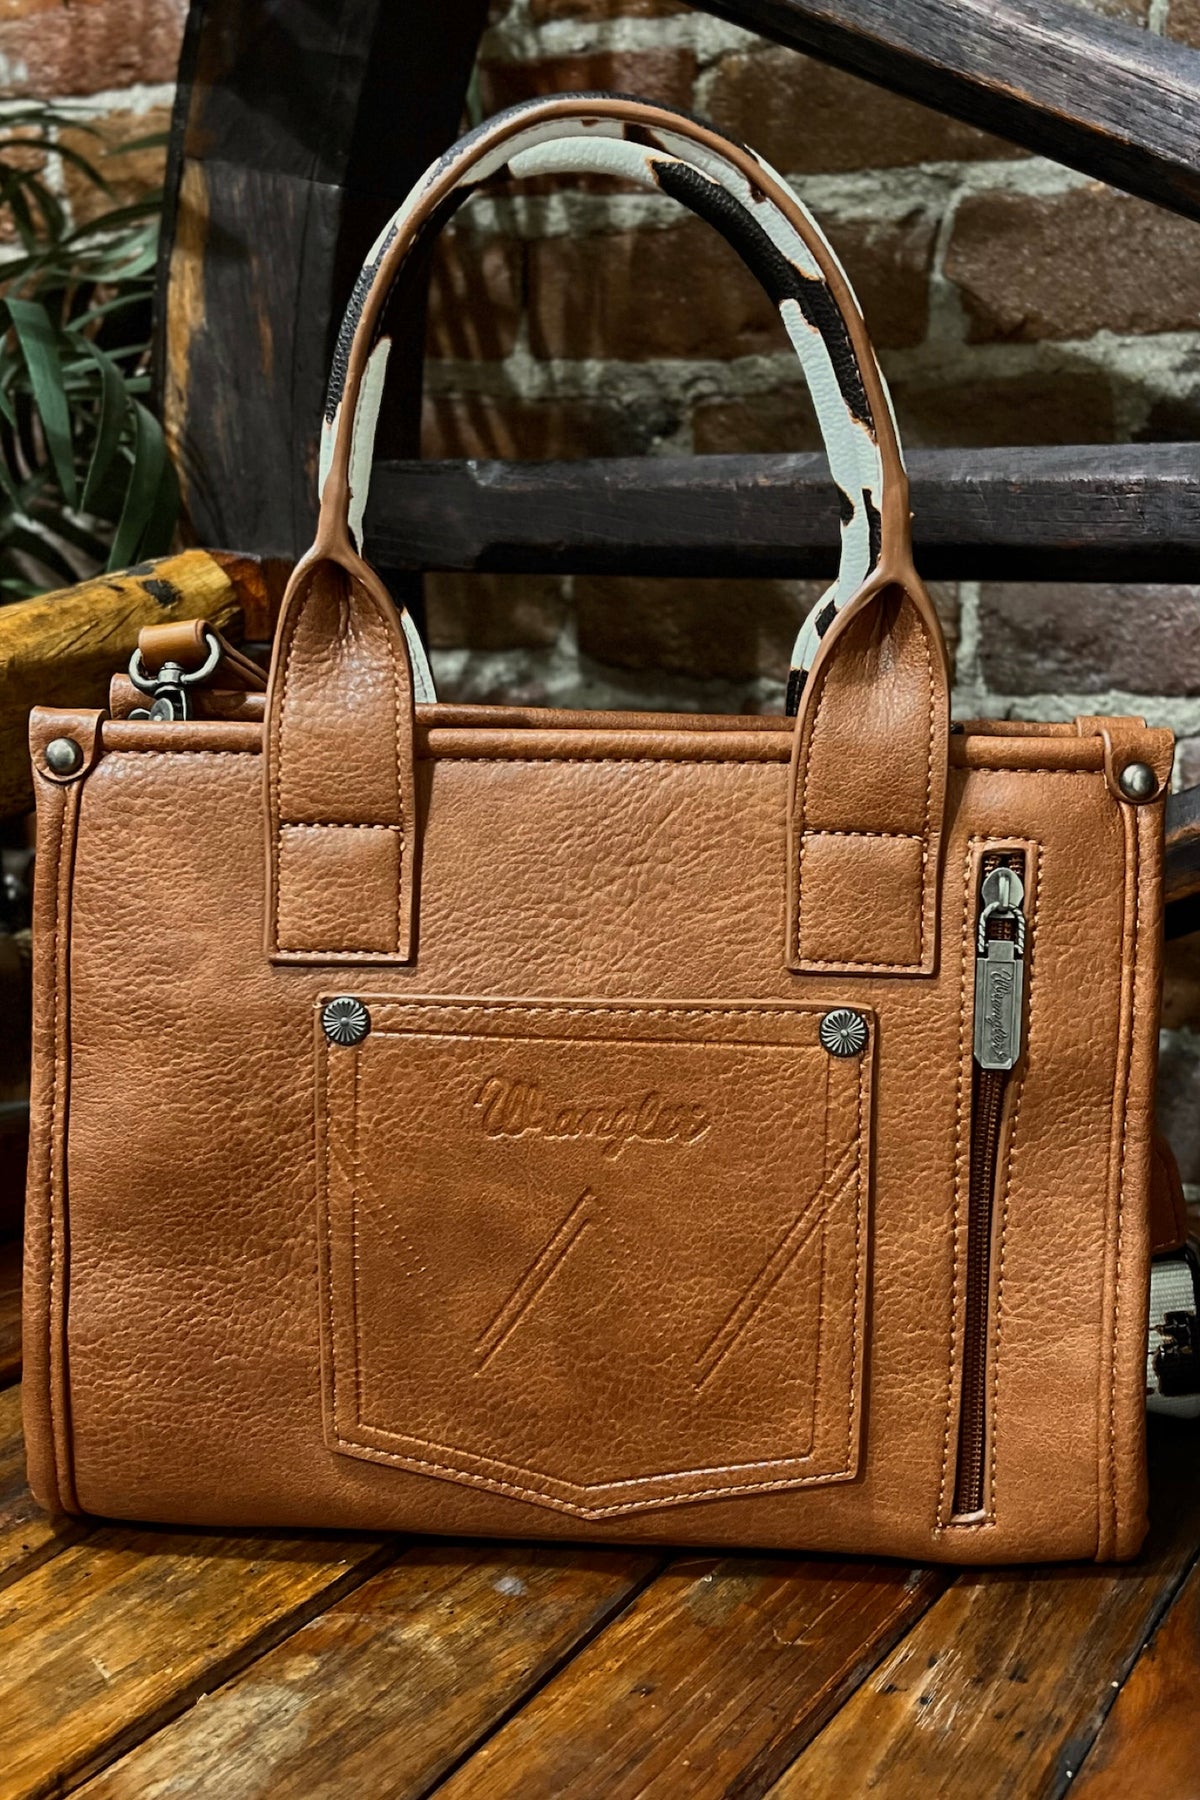 Wrangler Brown Cow Print Concealed Carry Crossbody Tote-Handbags & Accessories-Montana West-Gallop 'n Glitz- Women's Western Wear Boutique, Located in Grants Pass, Oregon